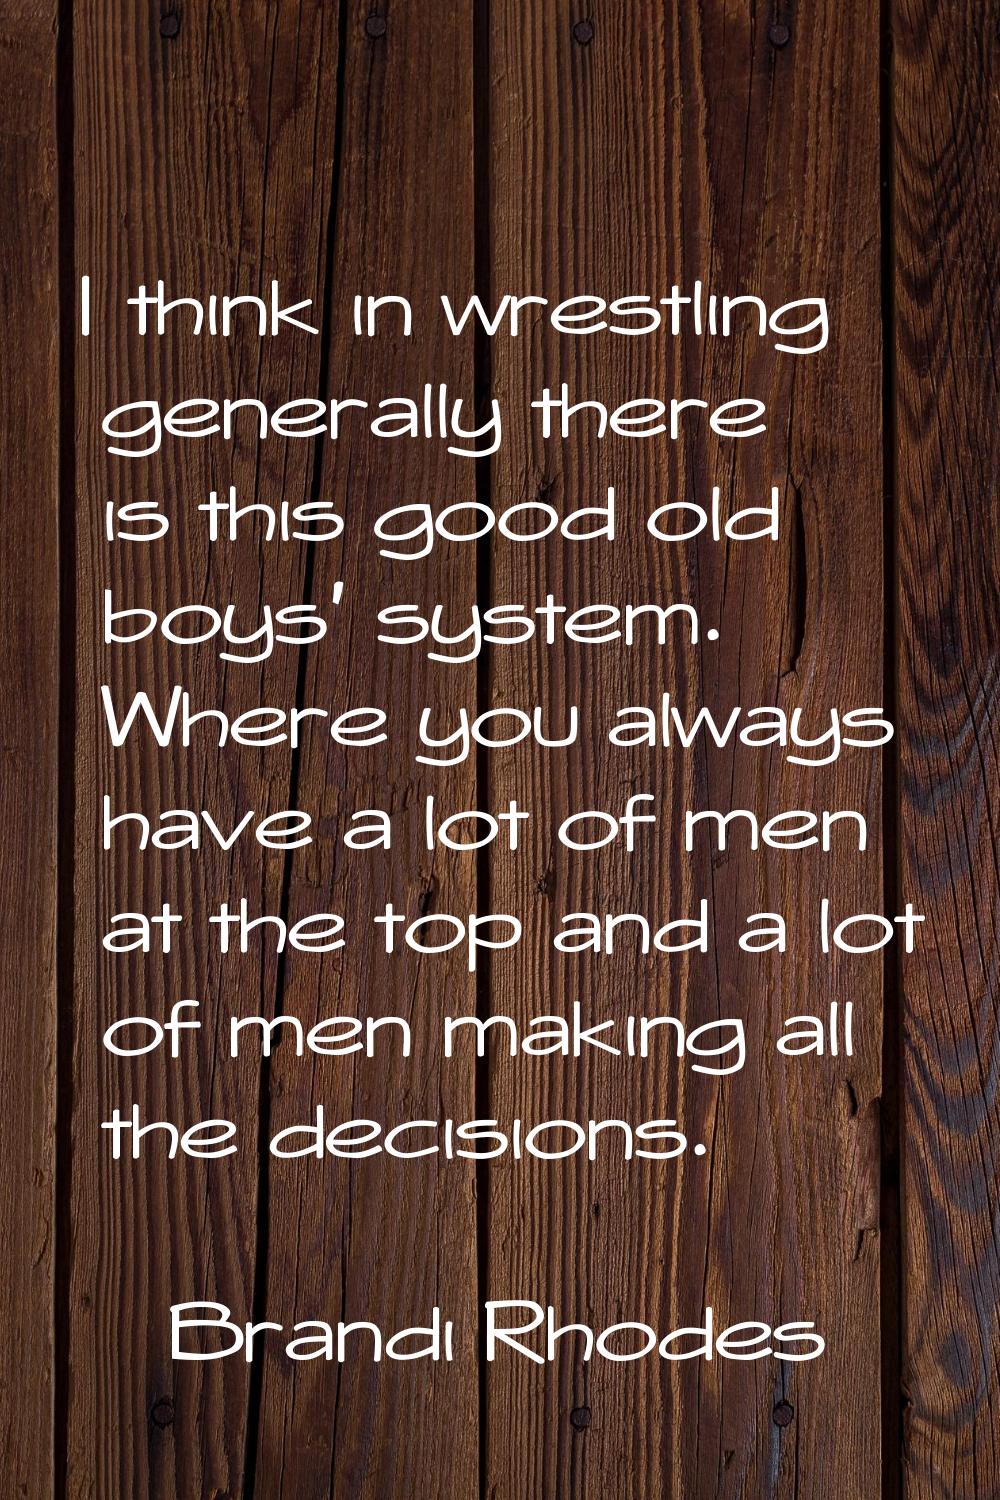 I think in wrestling generally there is this good old boys' system. Where you always have a lot of 